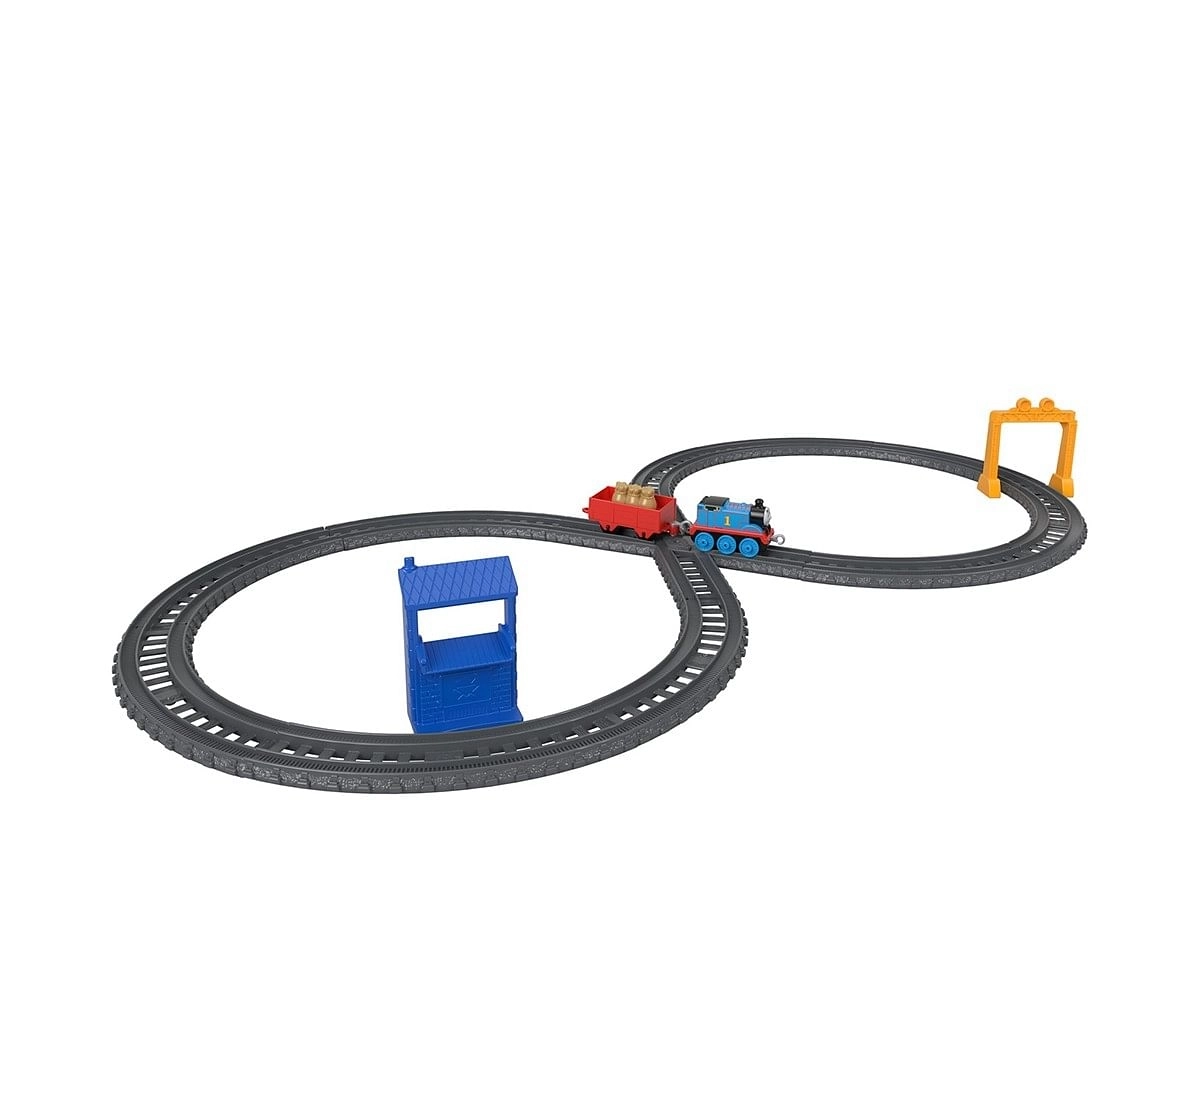 Thomas and Friends Trackmaster Thomas' Mail Delivery Train Engine Adventure,  Activity Toys for Kids age 7Y+ 